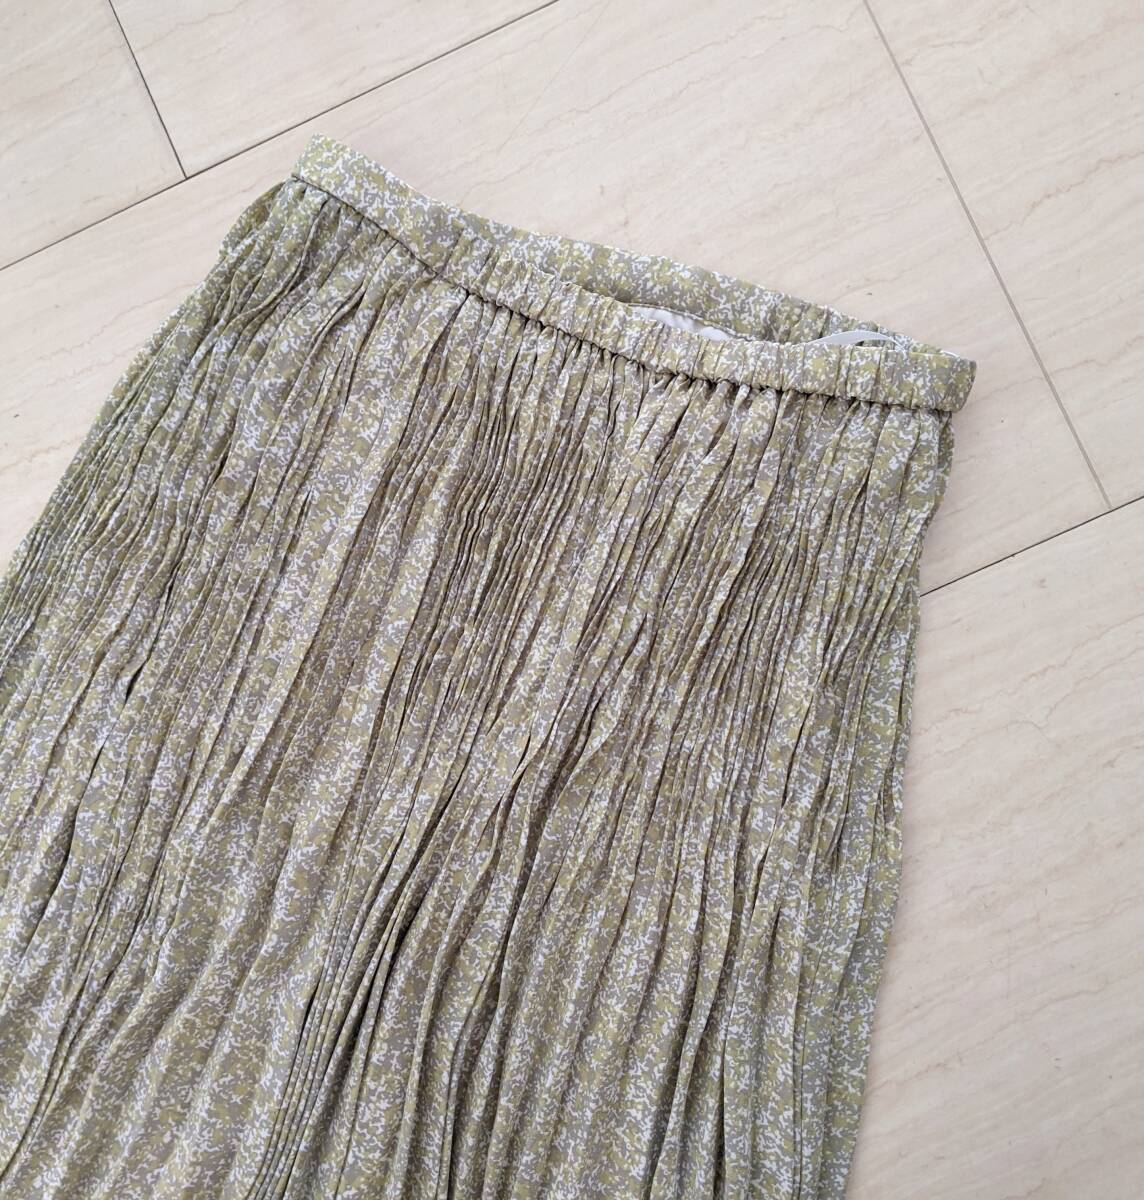  have on little Natural Beauty Basic long height skirt size M